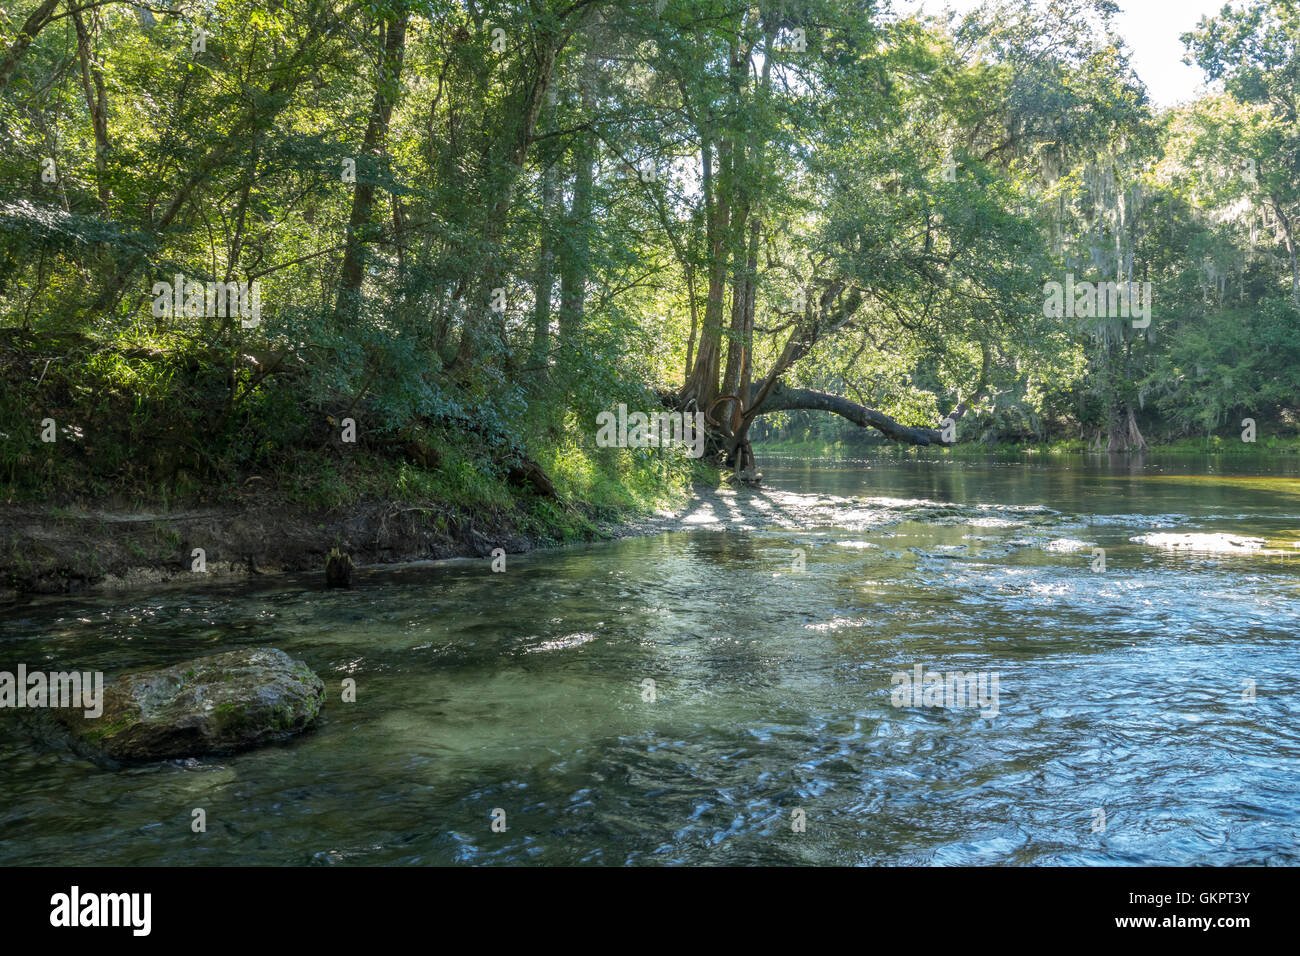 Confluence of Poe Springs run and Santa Fe river, Gilchrist County, Florida Stock Photo